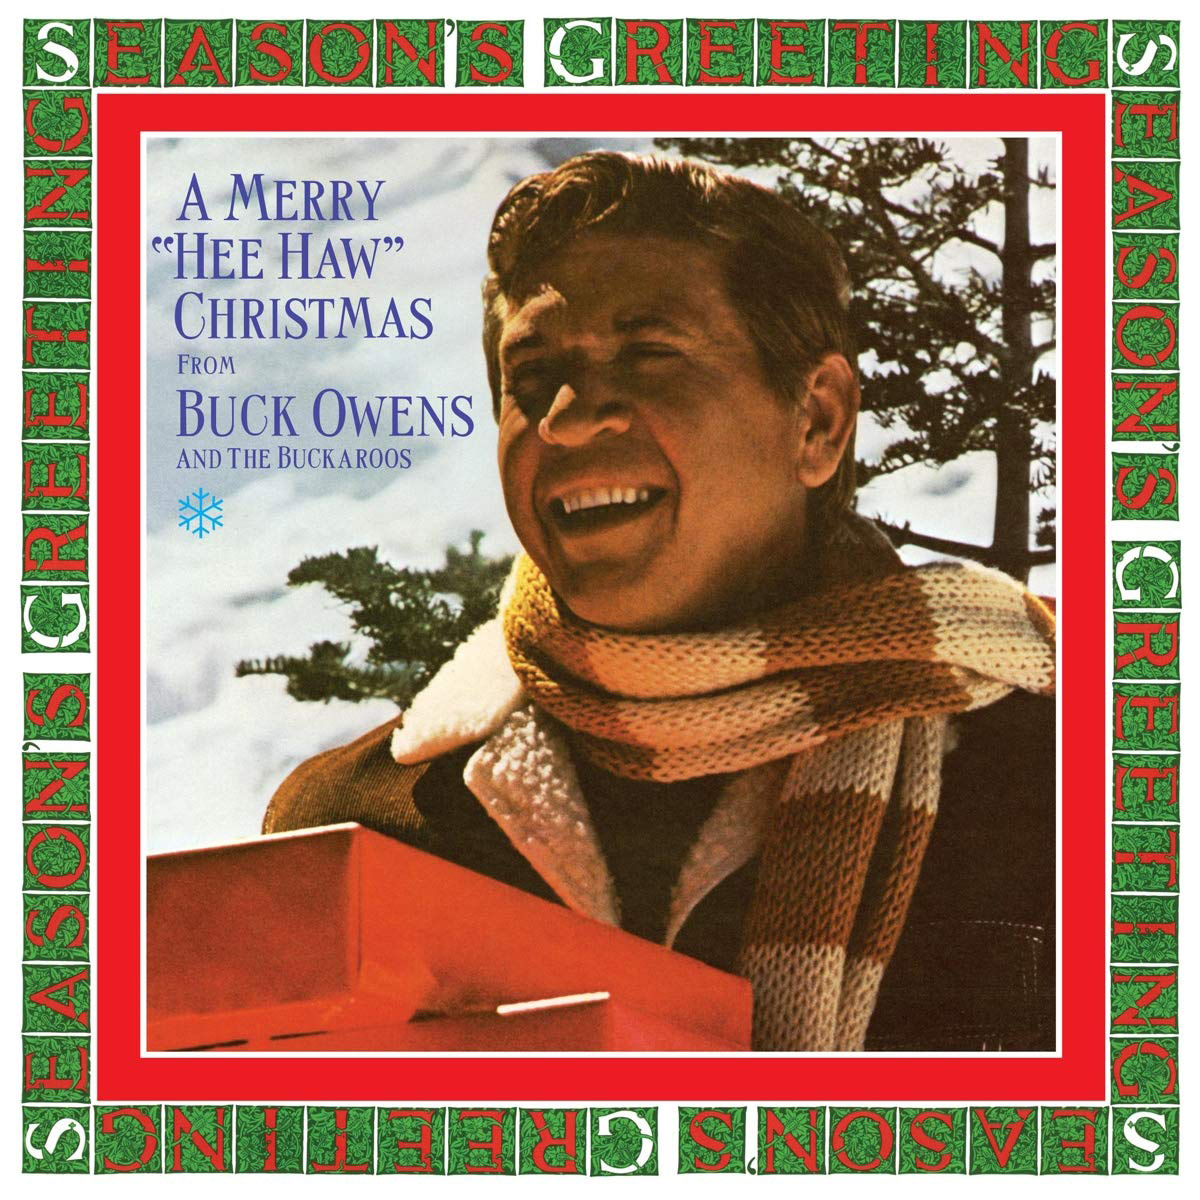 Omnivore Recordings releases Buck Owens' A Merry “Hee Haw” Christmas on CD.